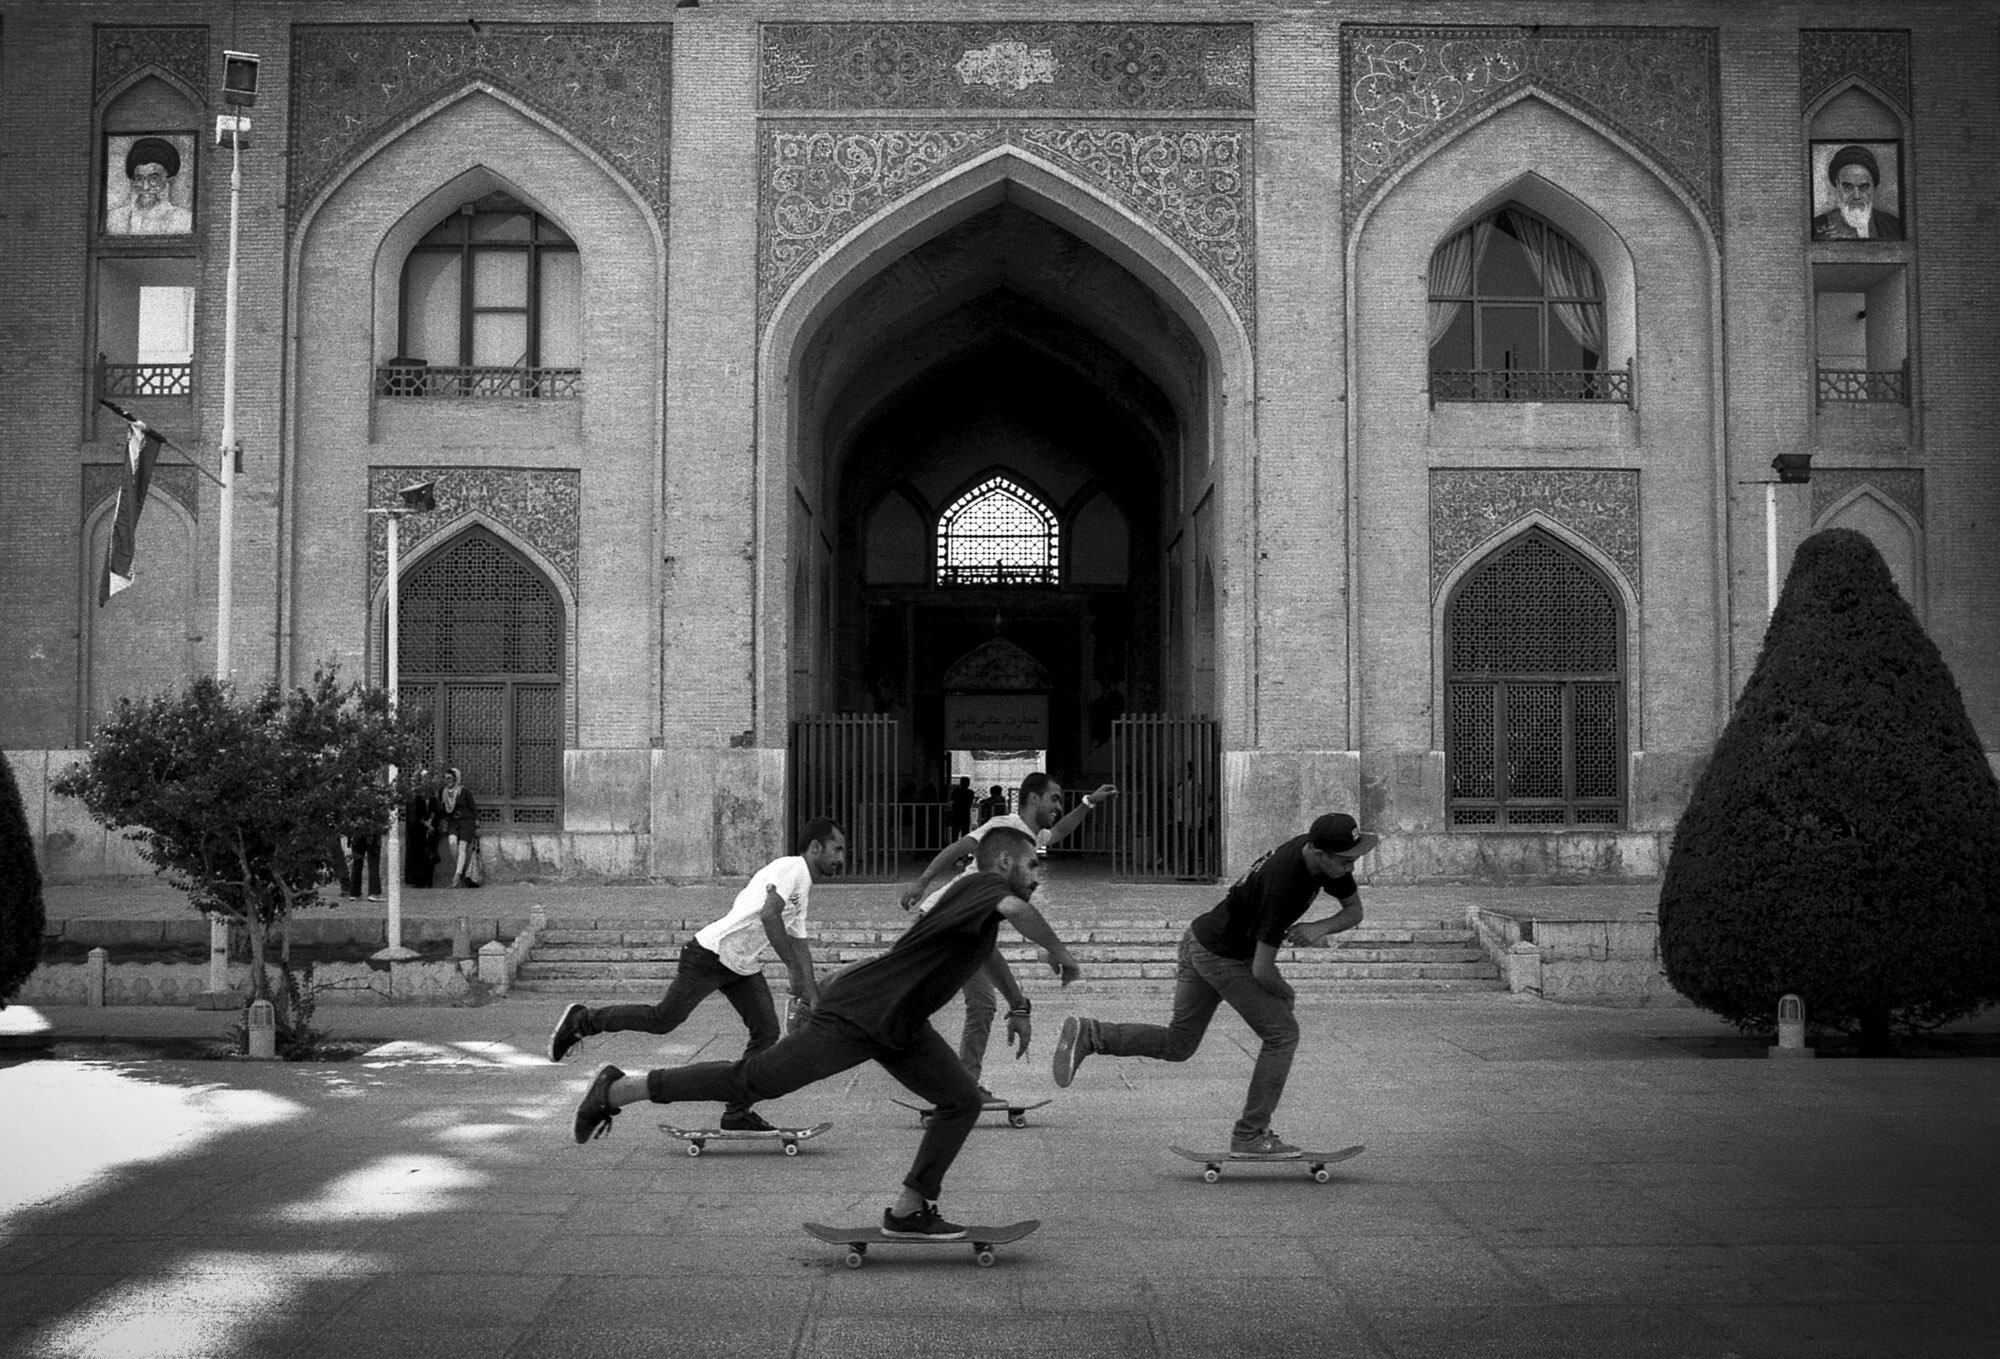  Young Iranians skateboards on Naghsh-e Jahan square in Isfahan, Iran, on September 28, 2015. 